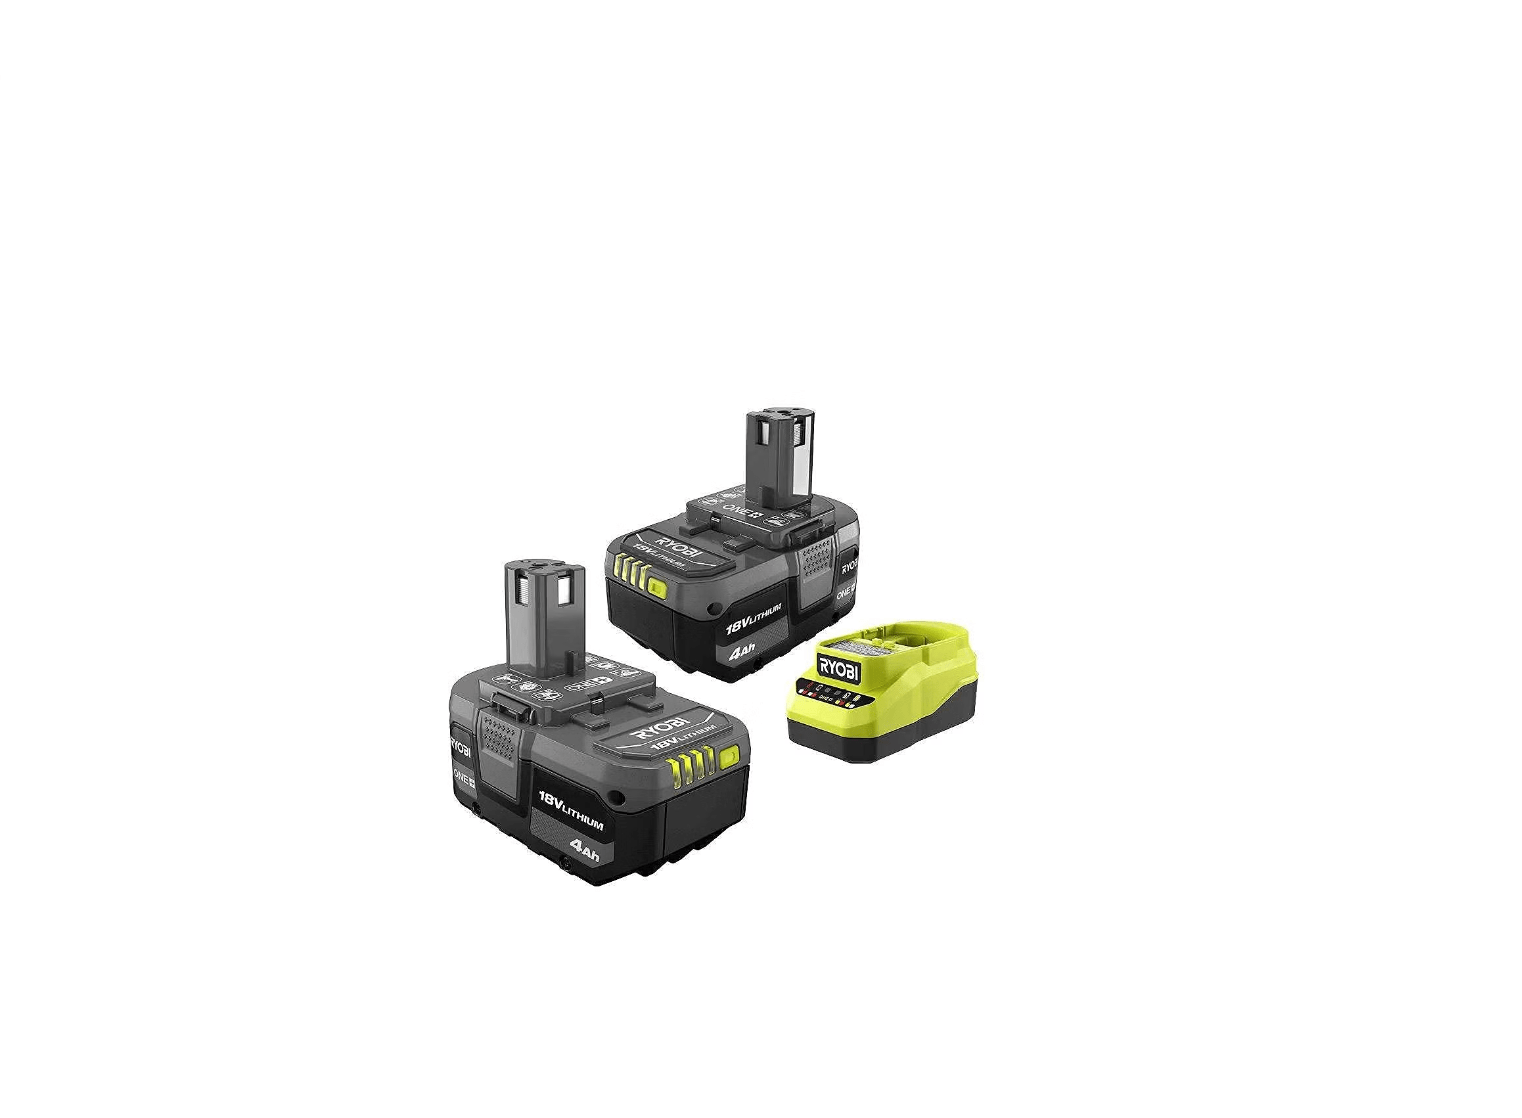 RYOBI PBP005 ONE+18V Lithium-Ion 4.0 Ah Battery (2-Pack) and Charger Kit User Manual